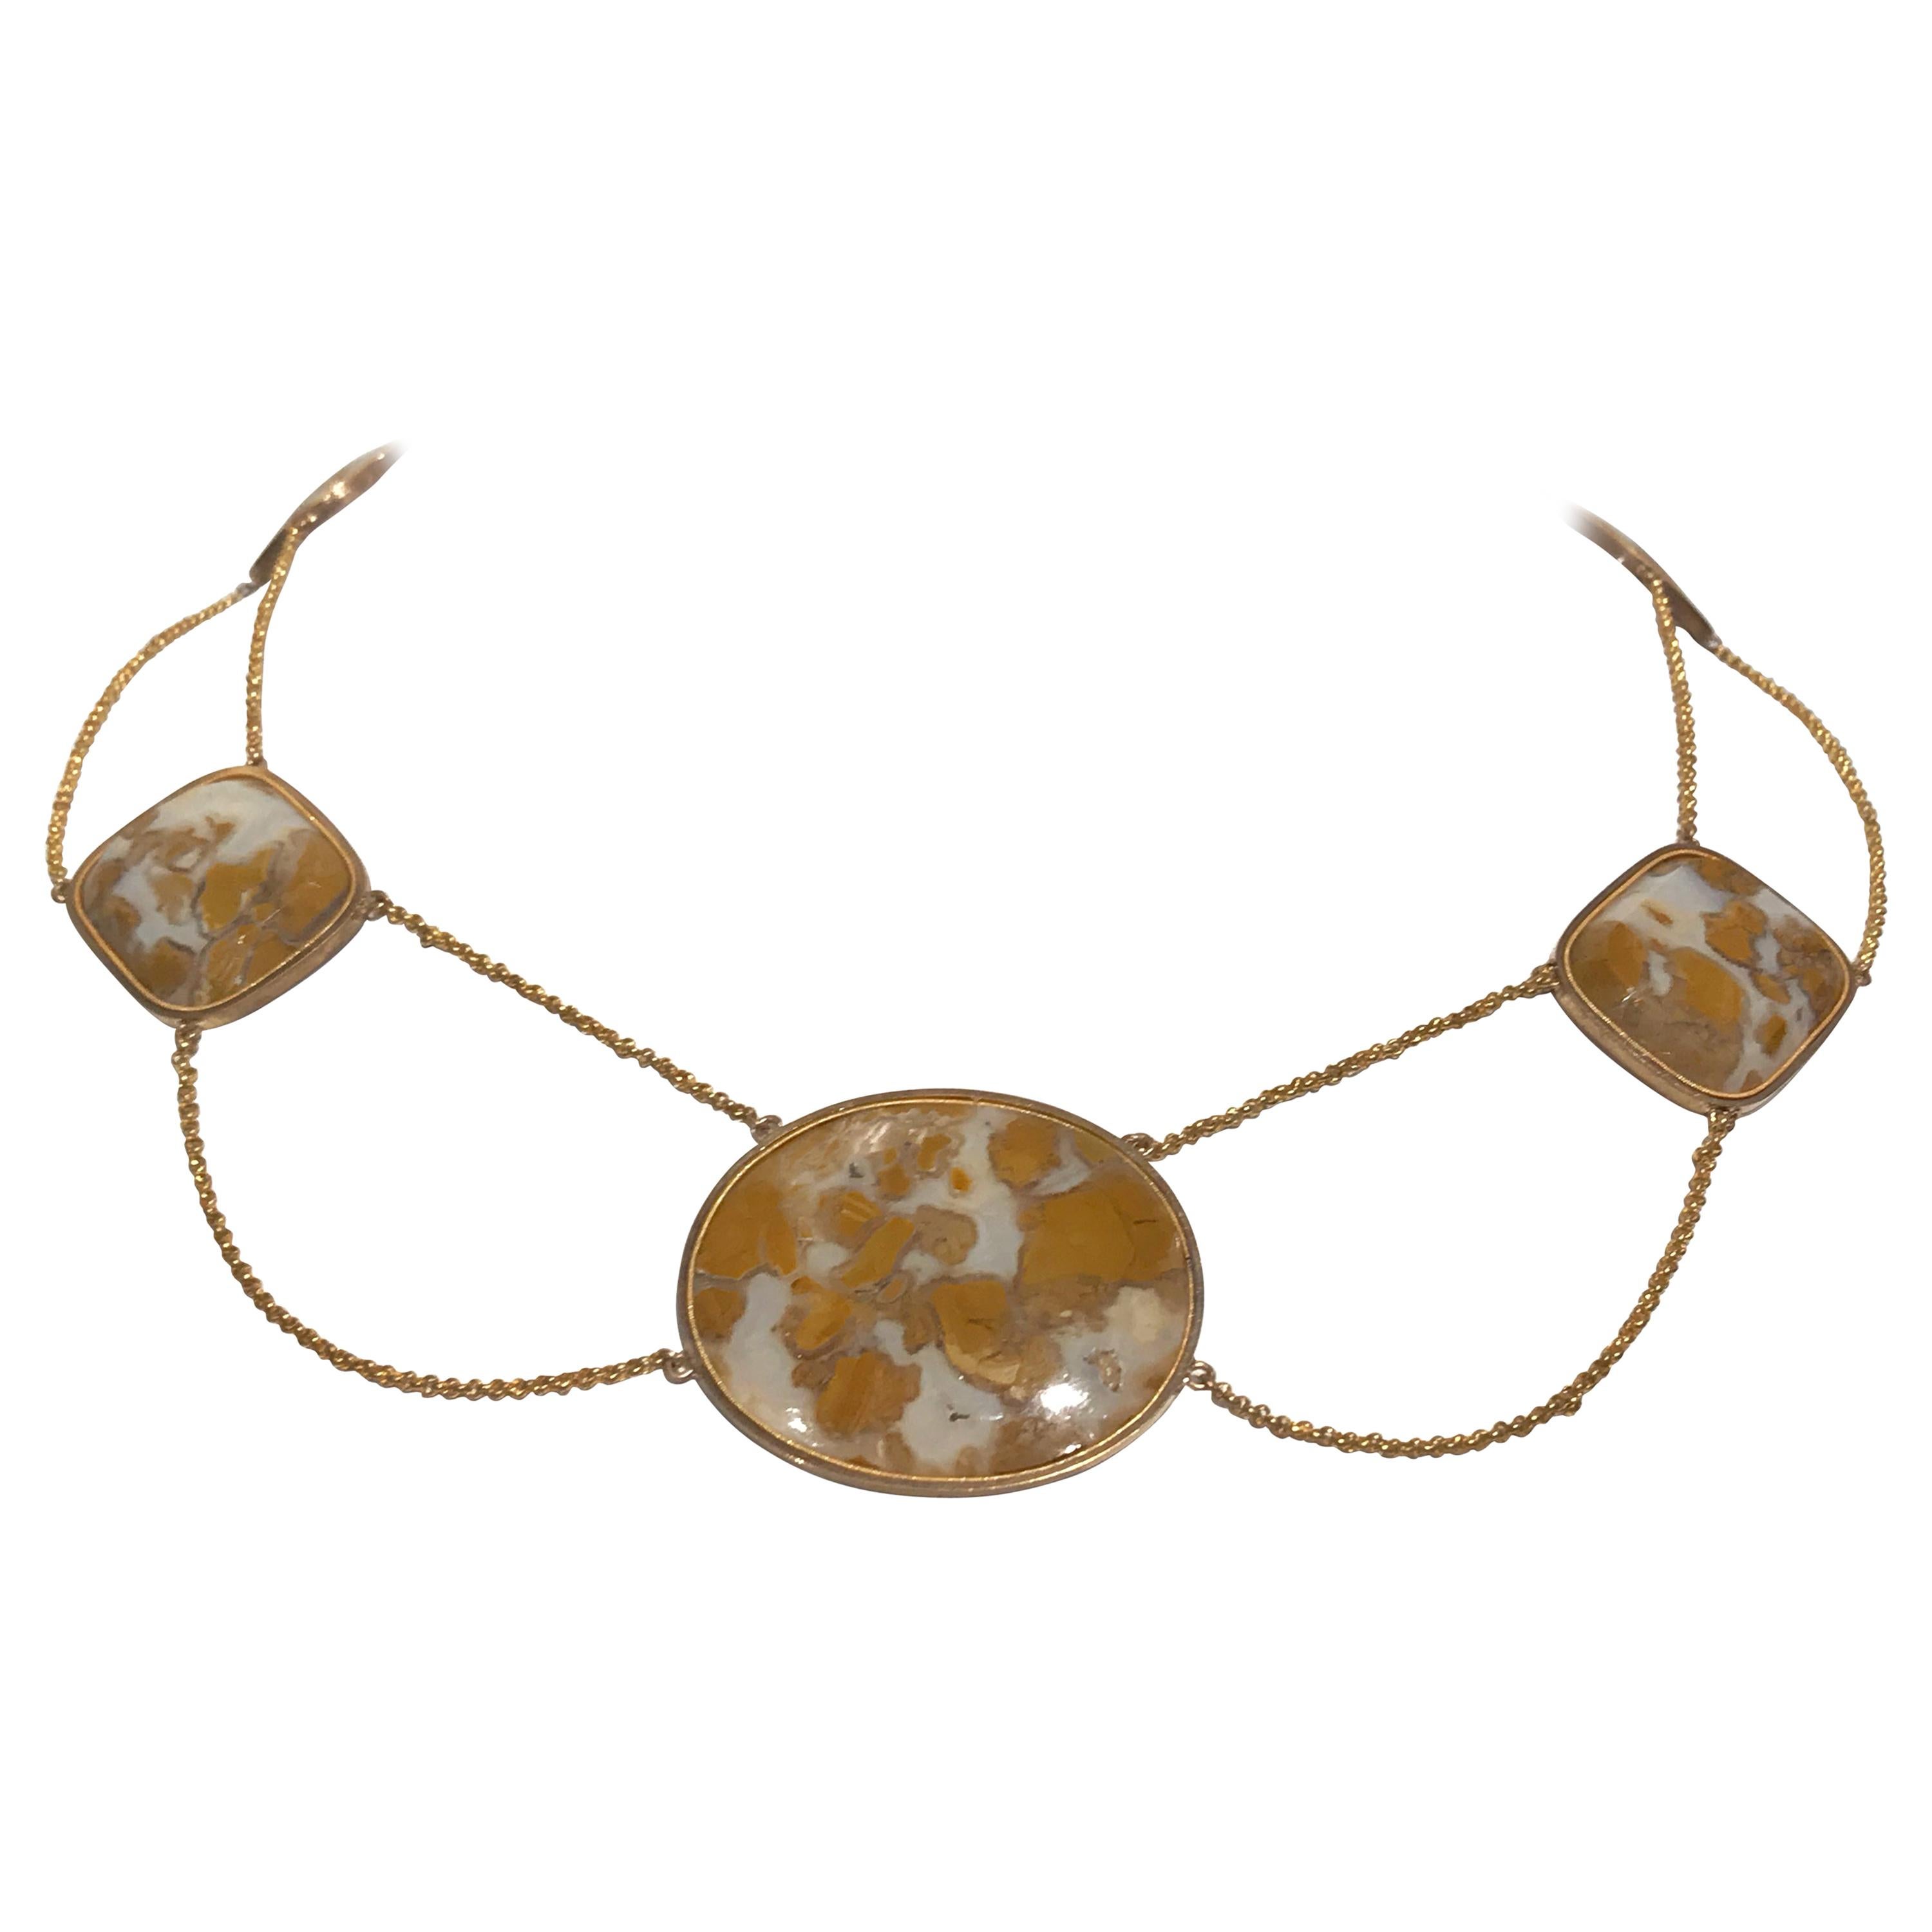 Mottled Agate Quartz and Gold Swag Festoon Necklace Estate Fine Jewelry